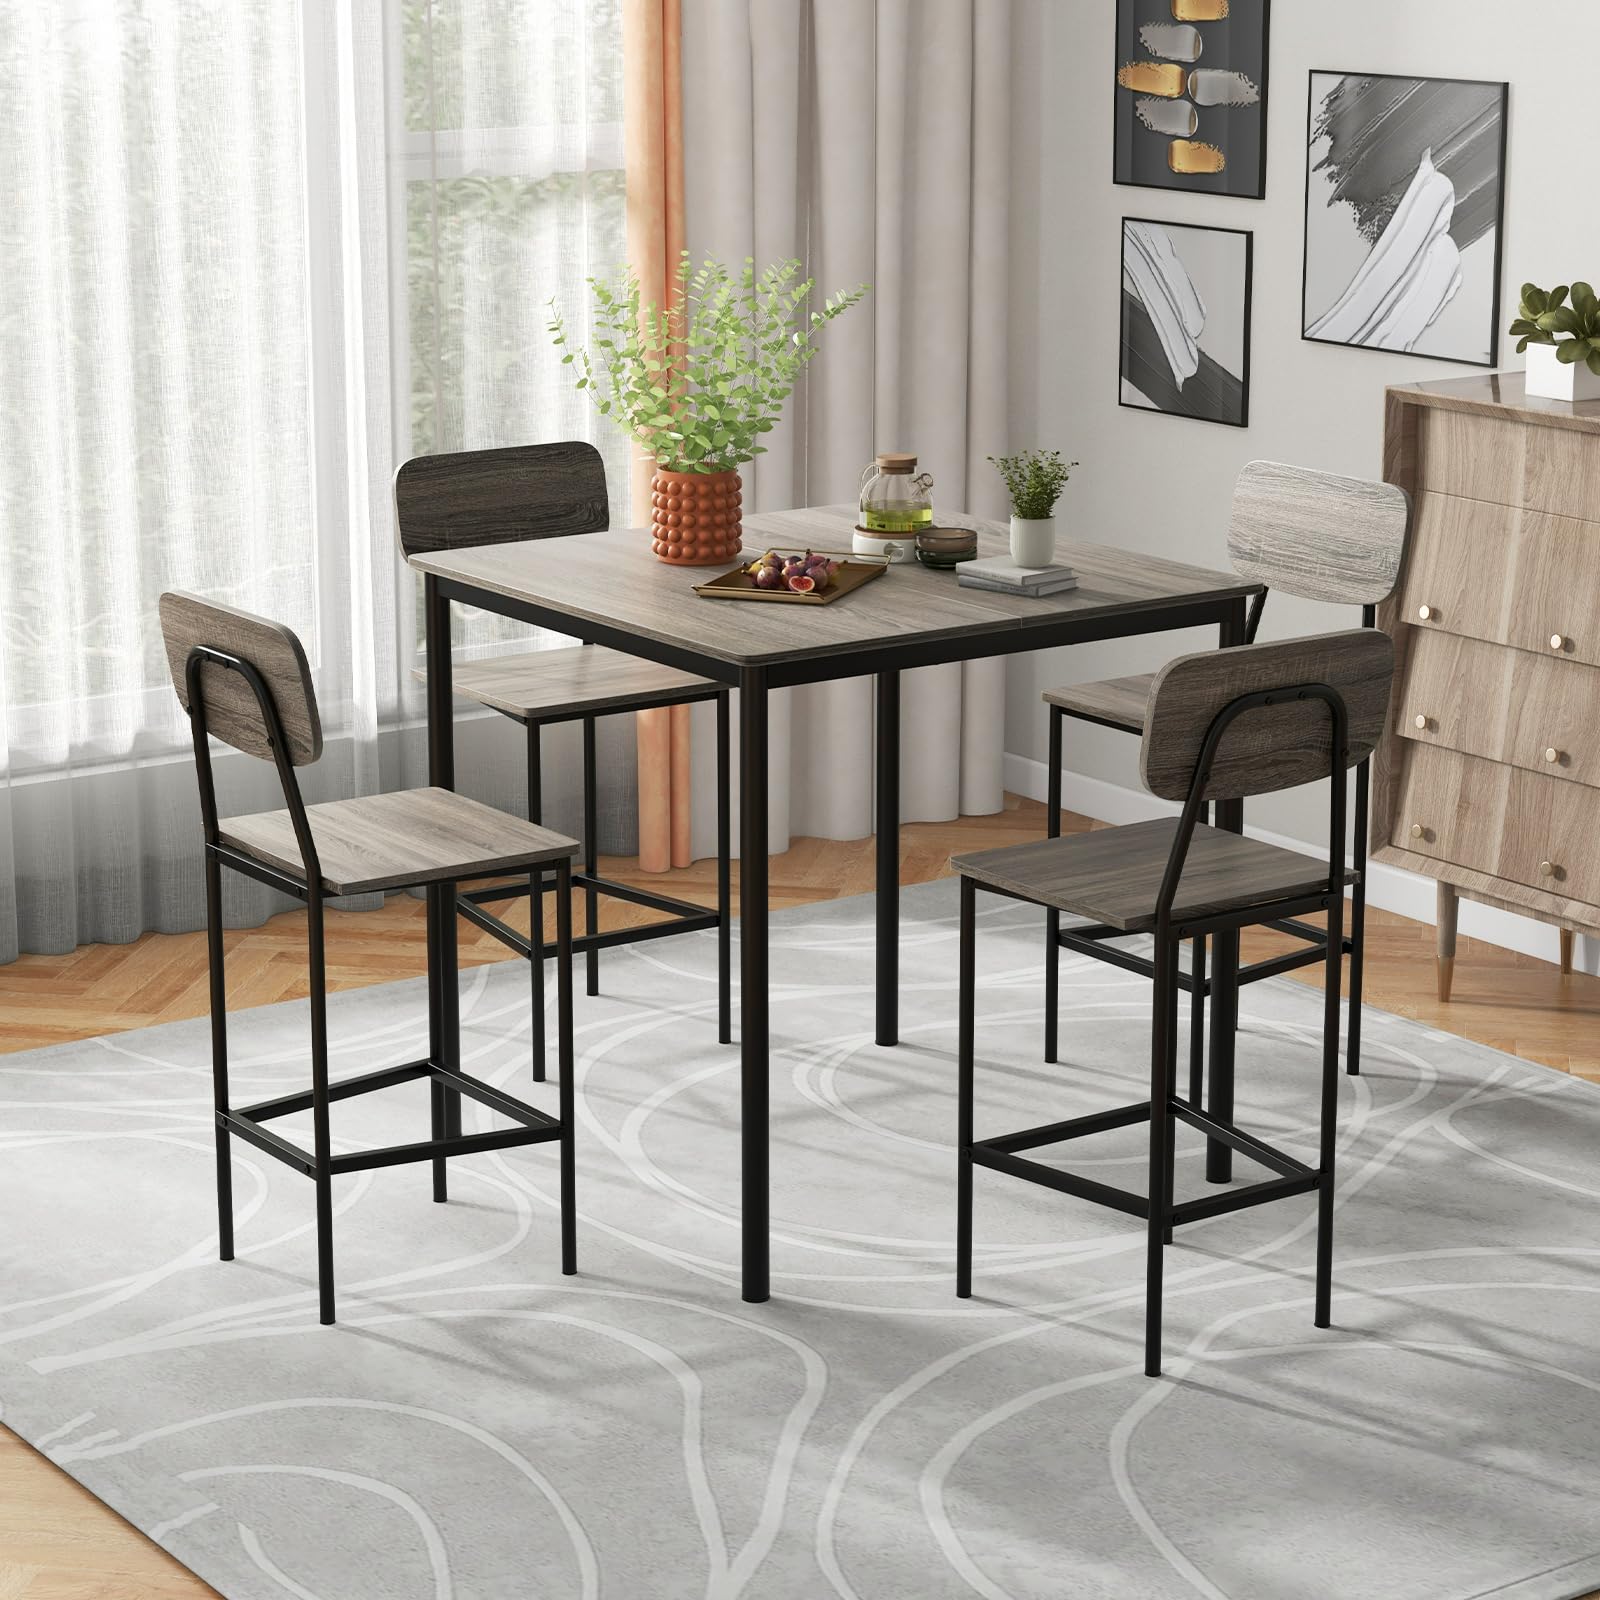 Giantex 5-Piece Dining Table Set W/Counter Height Table & 4 Bar Stools